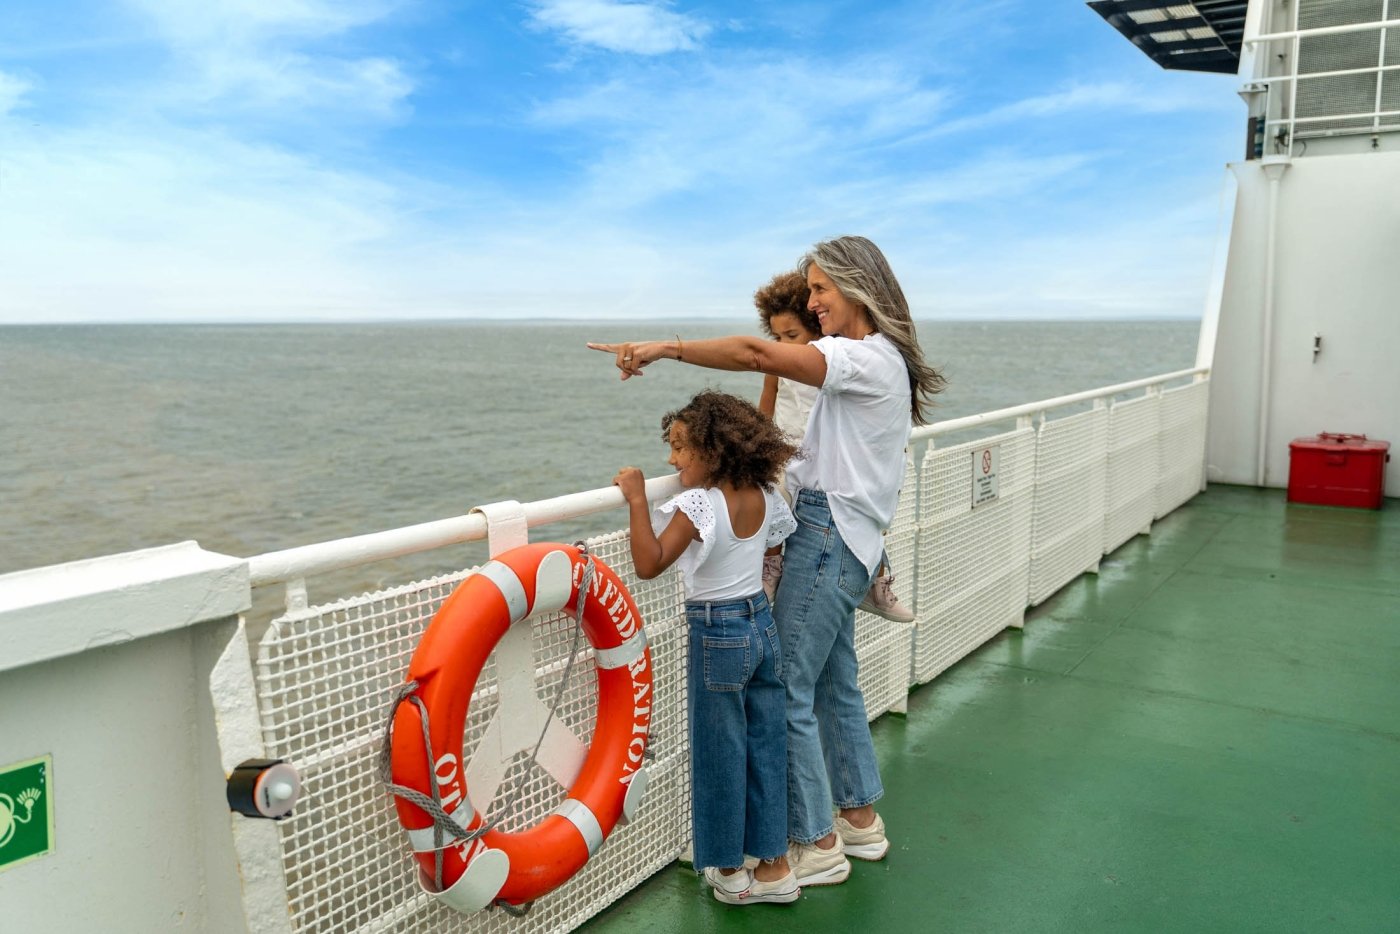 Female and two children observe from the viewing deck of ferry